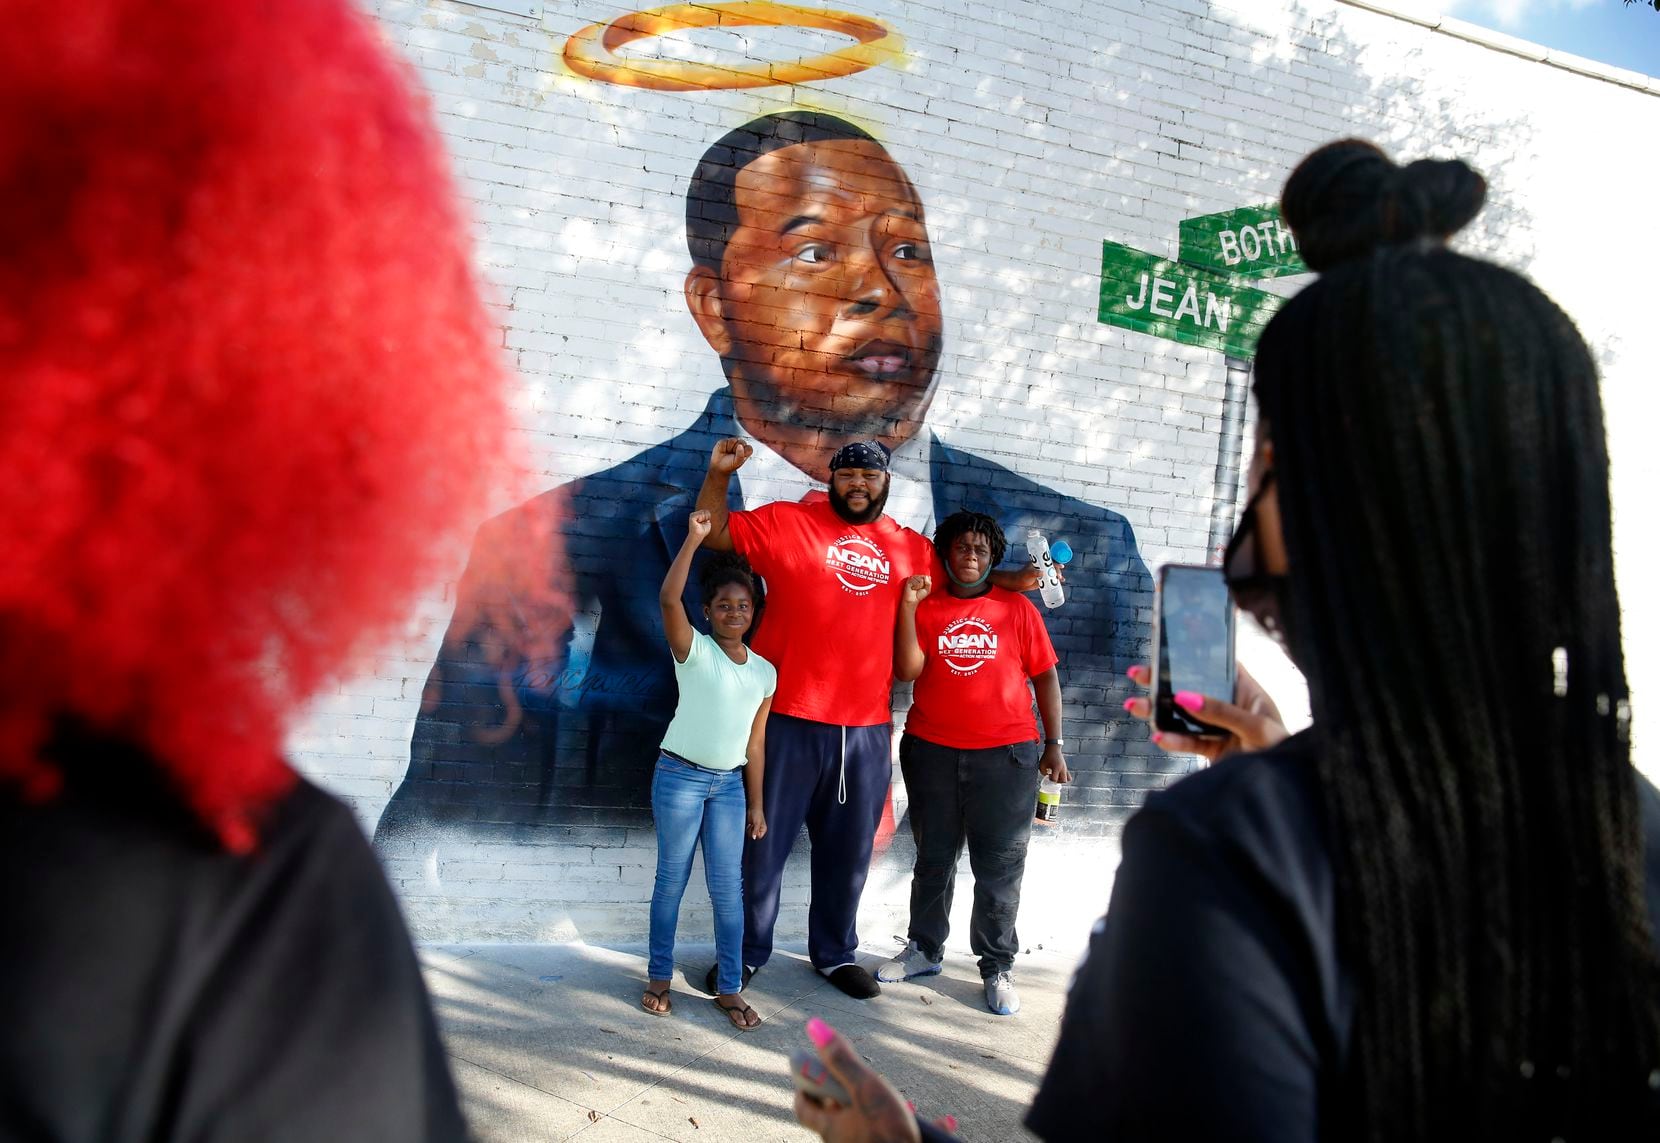 With a newly painted mural of Botham Jean as a backdrop, Frisco Jackson of Dallas posed for...